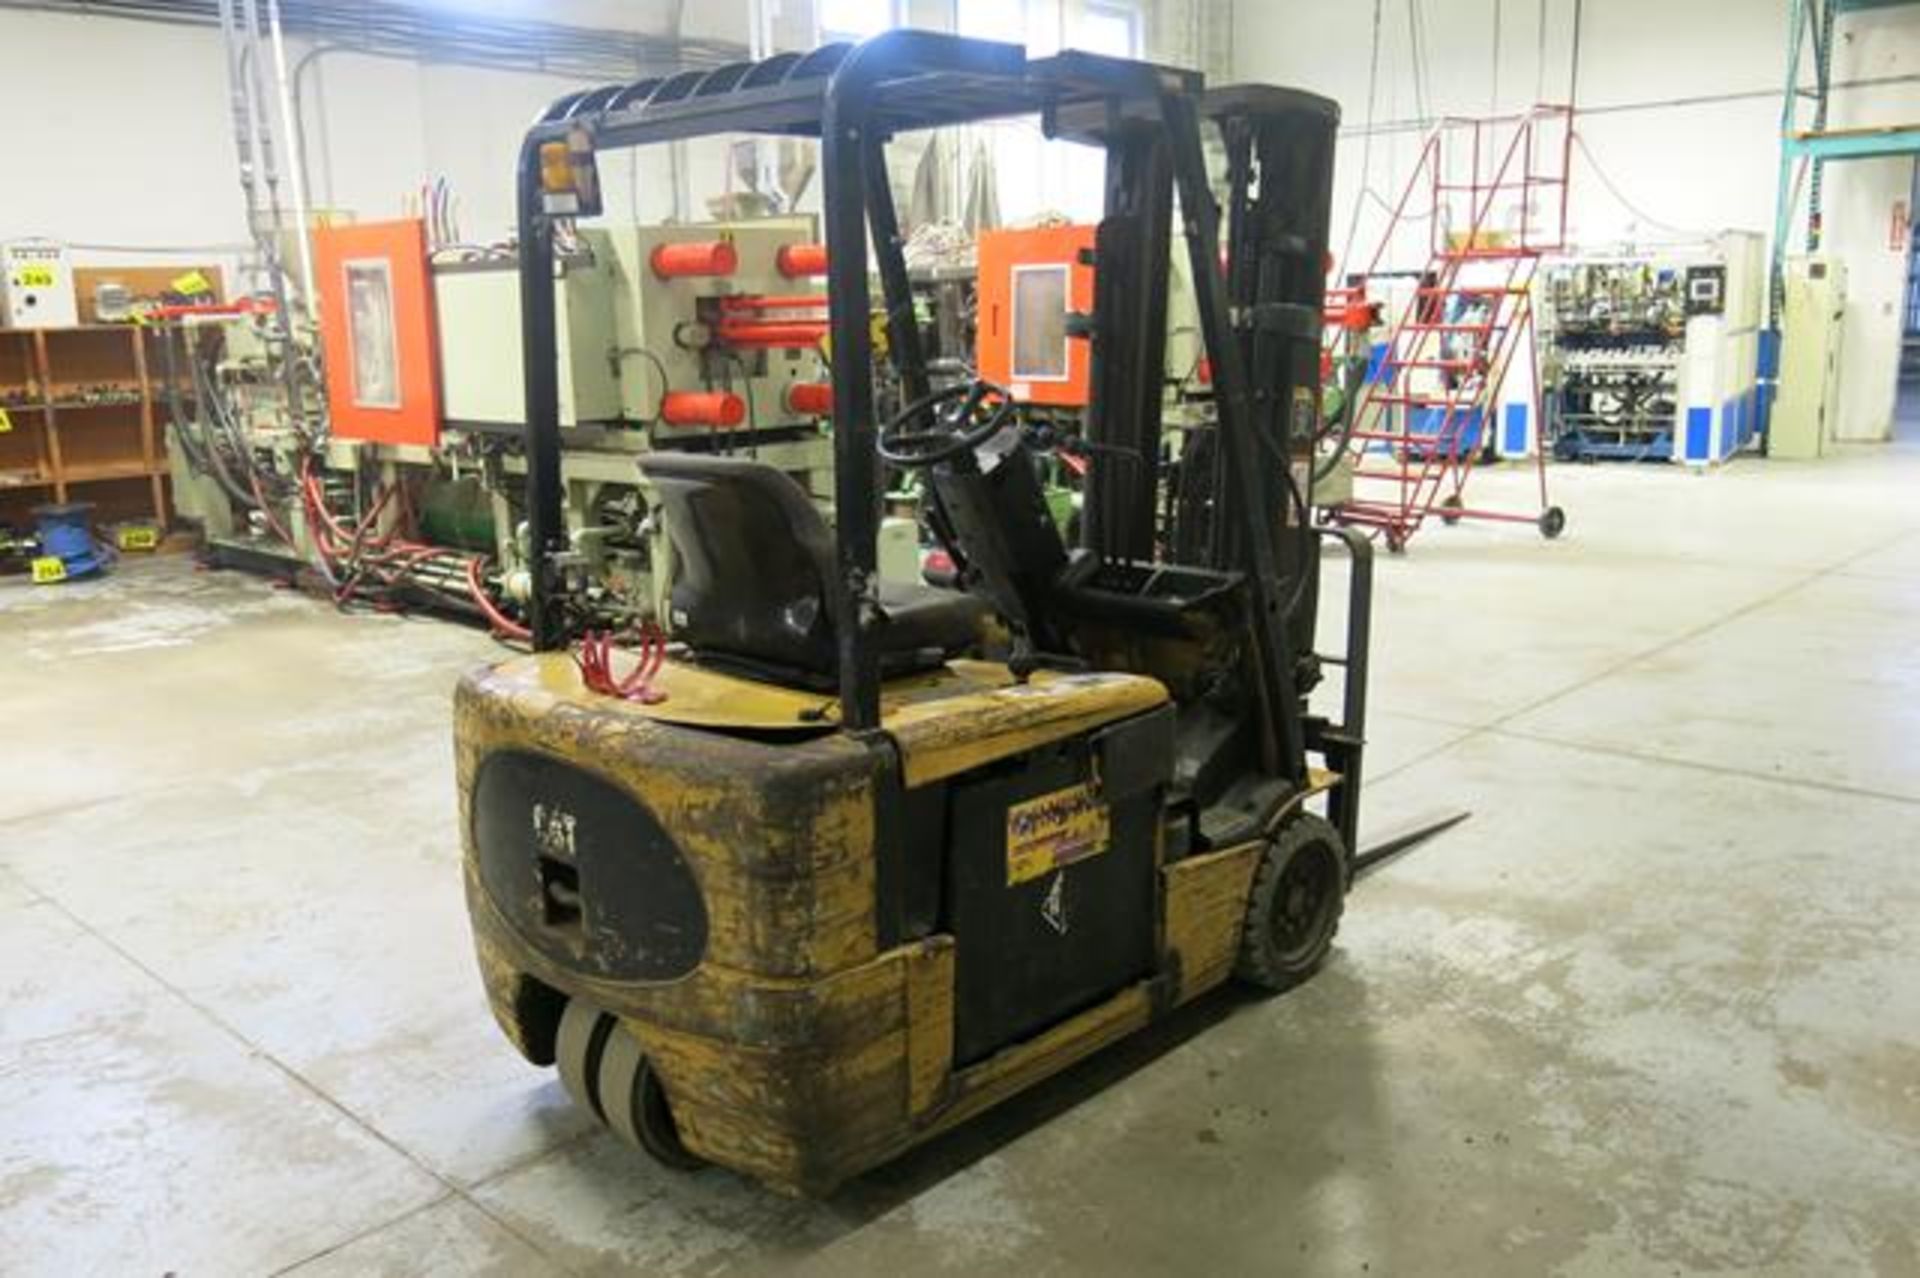 CATERPILLAR, EP20KT, 3,700 LBS., 3 STAGE, 3-WHEEL, BATTERY POWERED, FORKLIFT, SIDESHIFT, 188" - Image 5 of 13